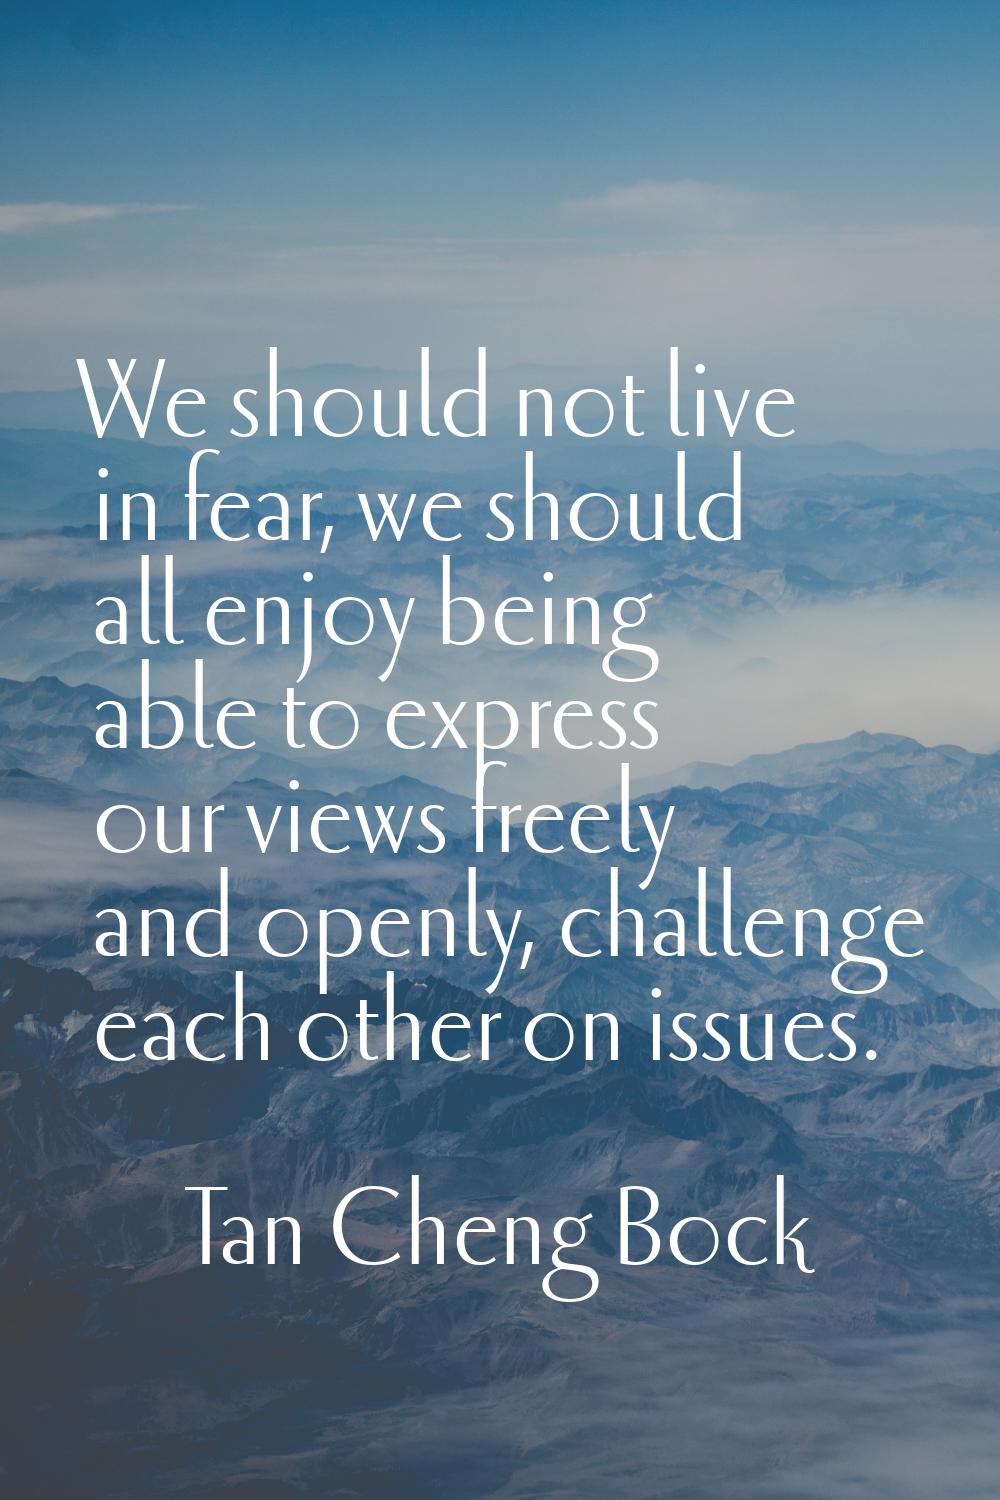 We should not live in fear, we should all enjoy being able to express our views freely and openly, 